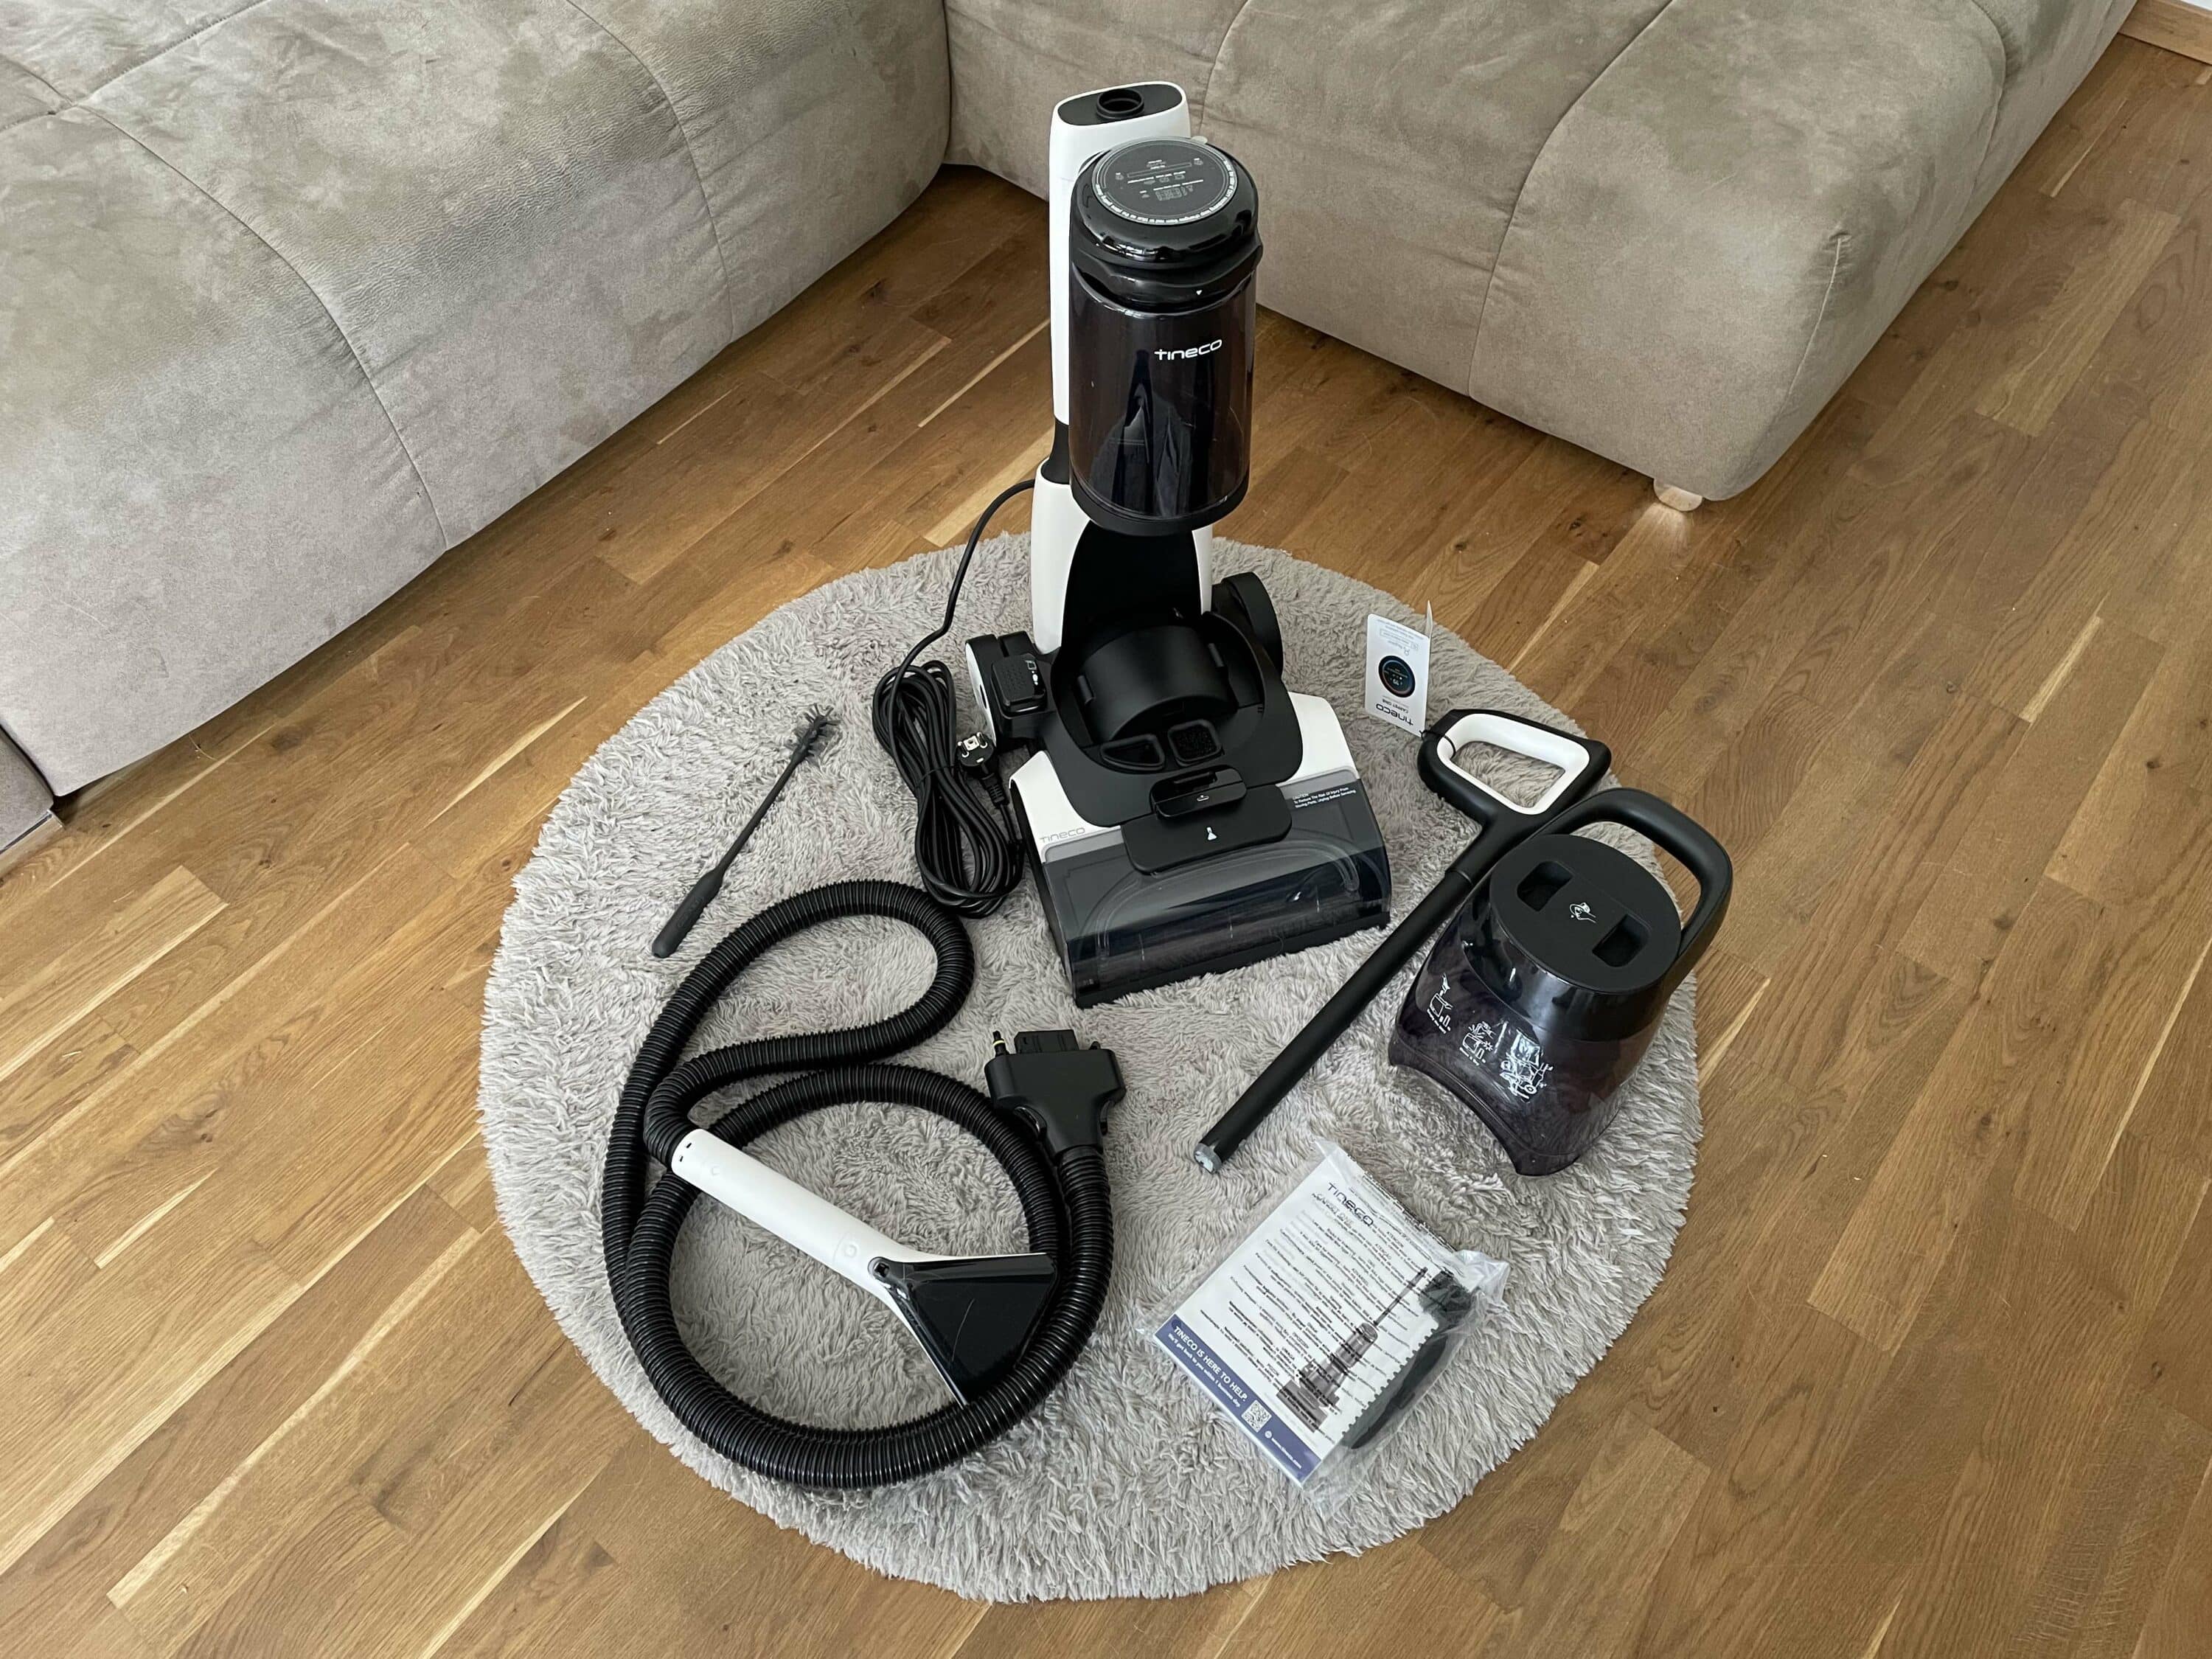 Tineco Carpet One Pro review: Brilliant carpet cleaning